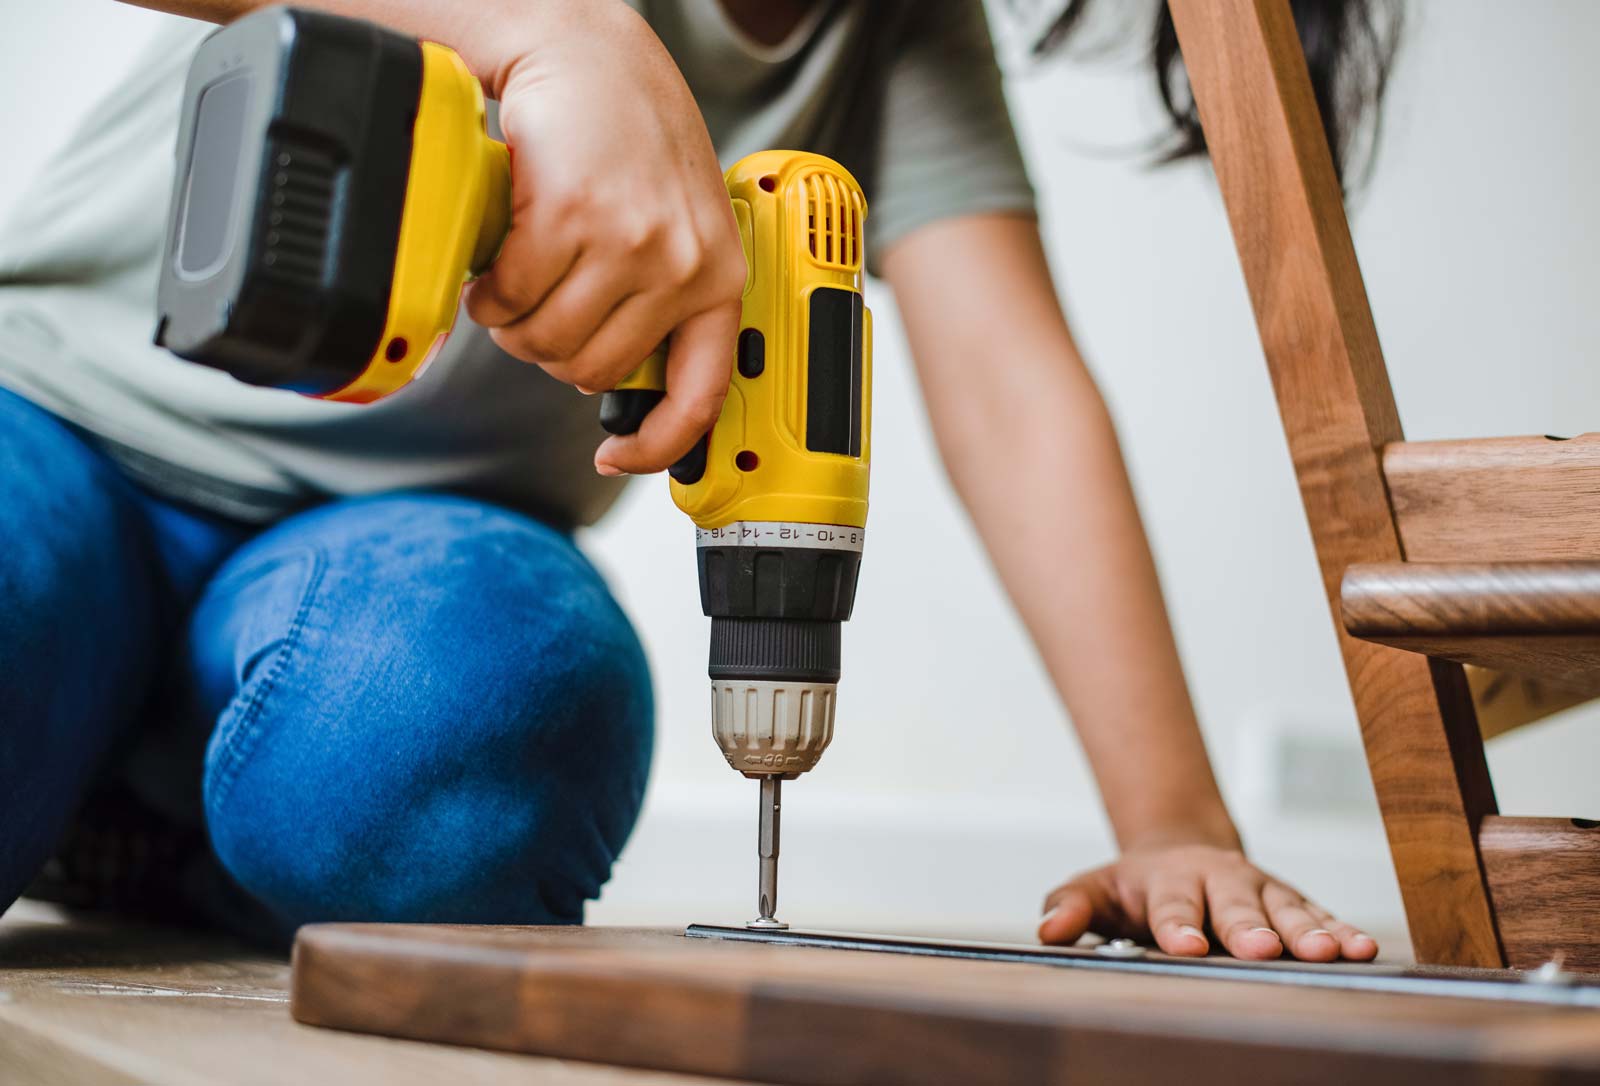 Image of a woman using a drill to assemble furniture